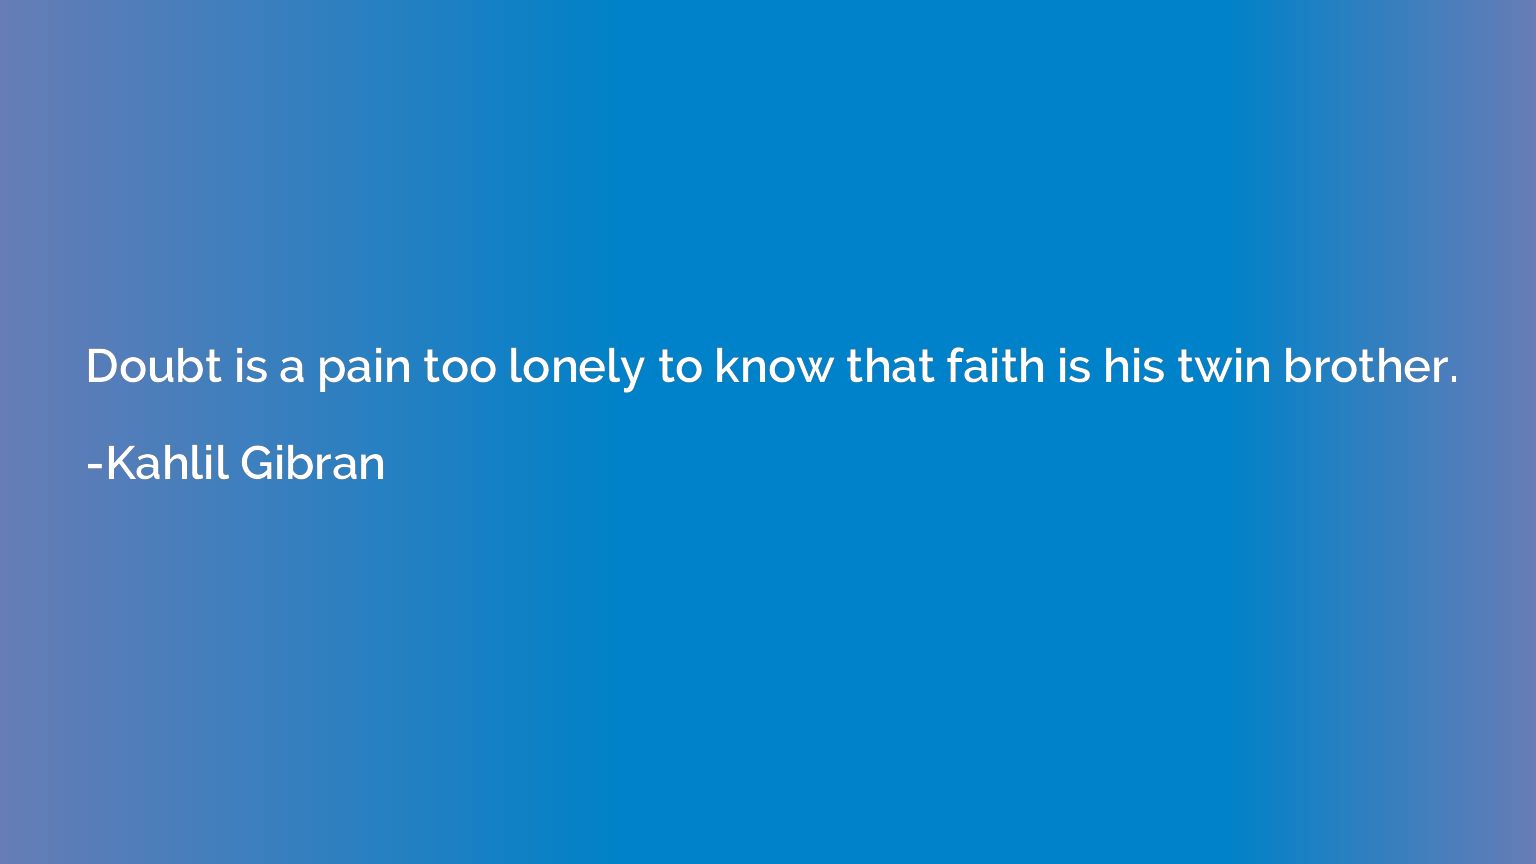 Doubt is a pain too lonely to know that faith is his twin br